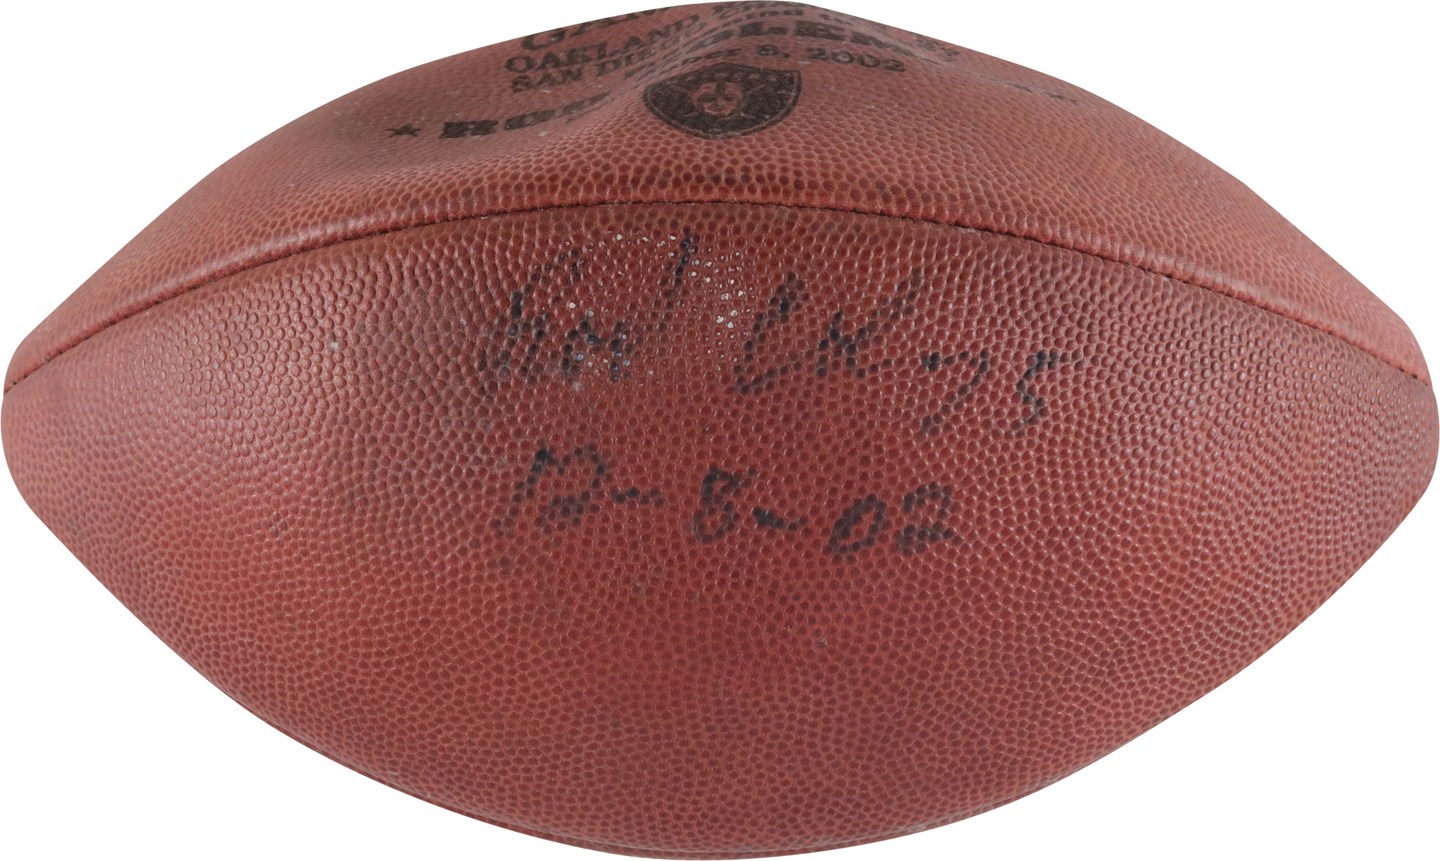 Football - 12/8/02 Rod Coleman Signed Game Used Football - Raiders vs. Chargers (PSA)